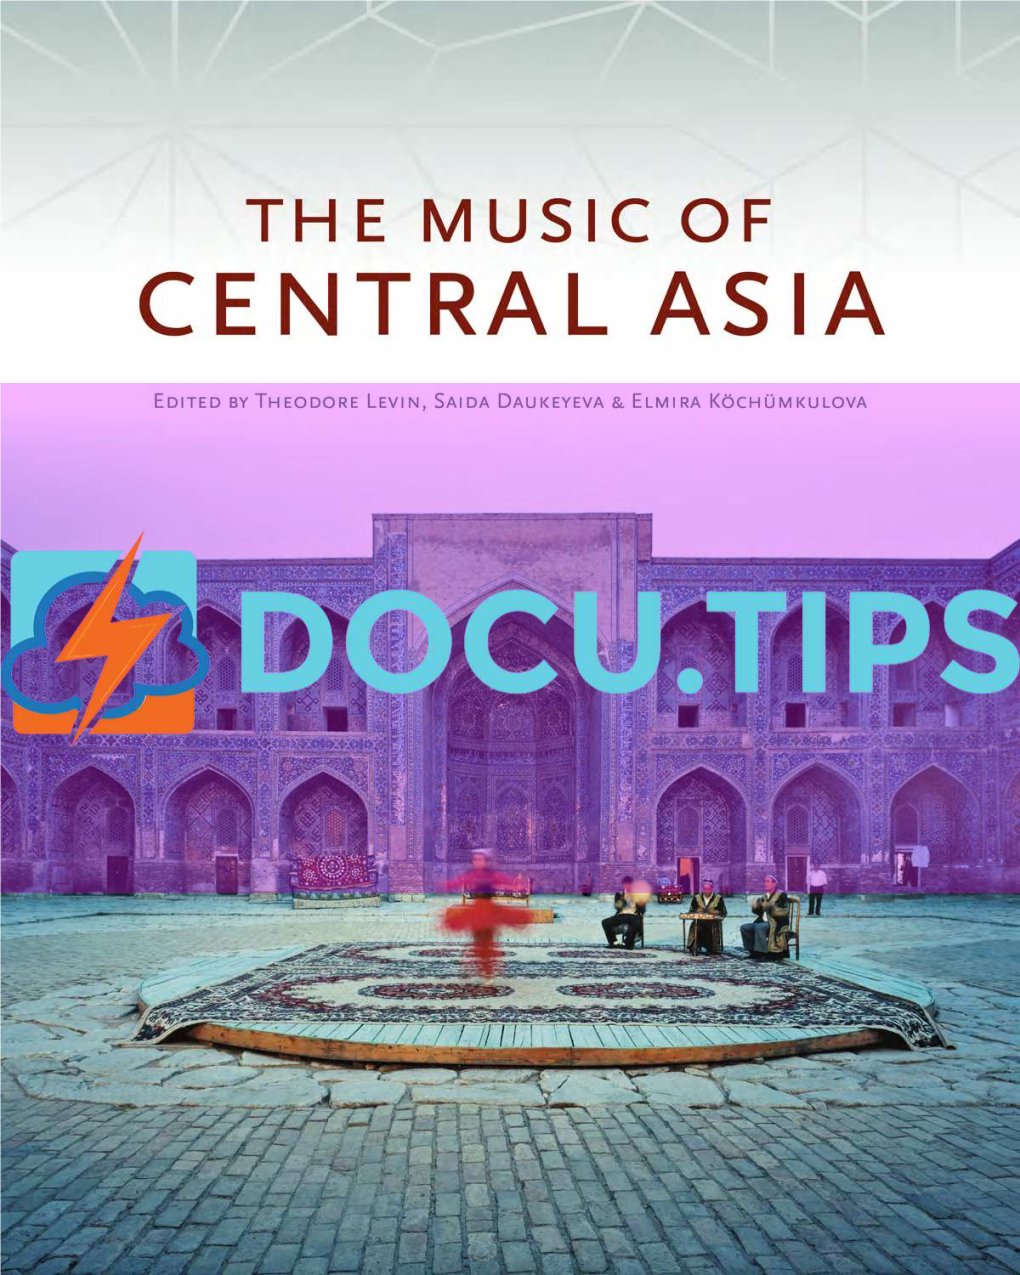 The Music of Central Asia (Excerpt)